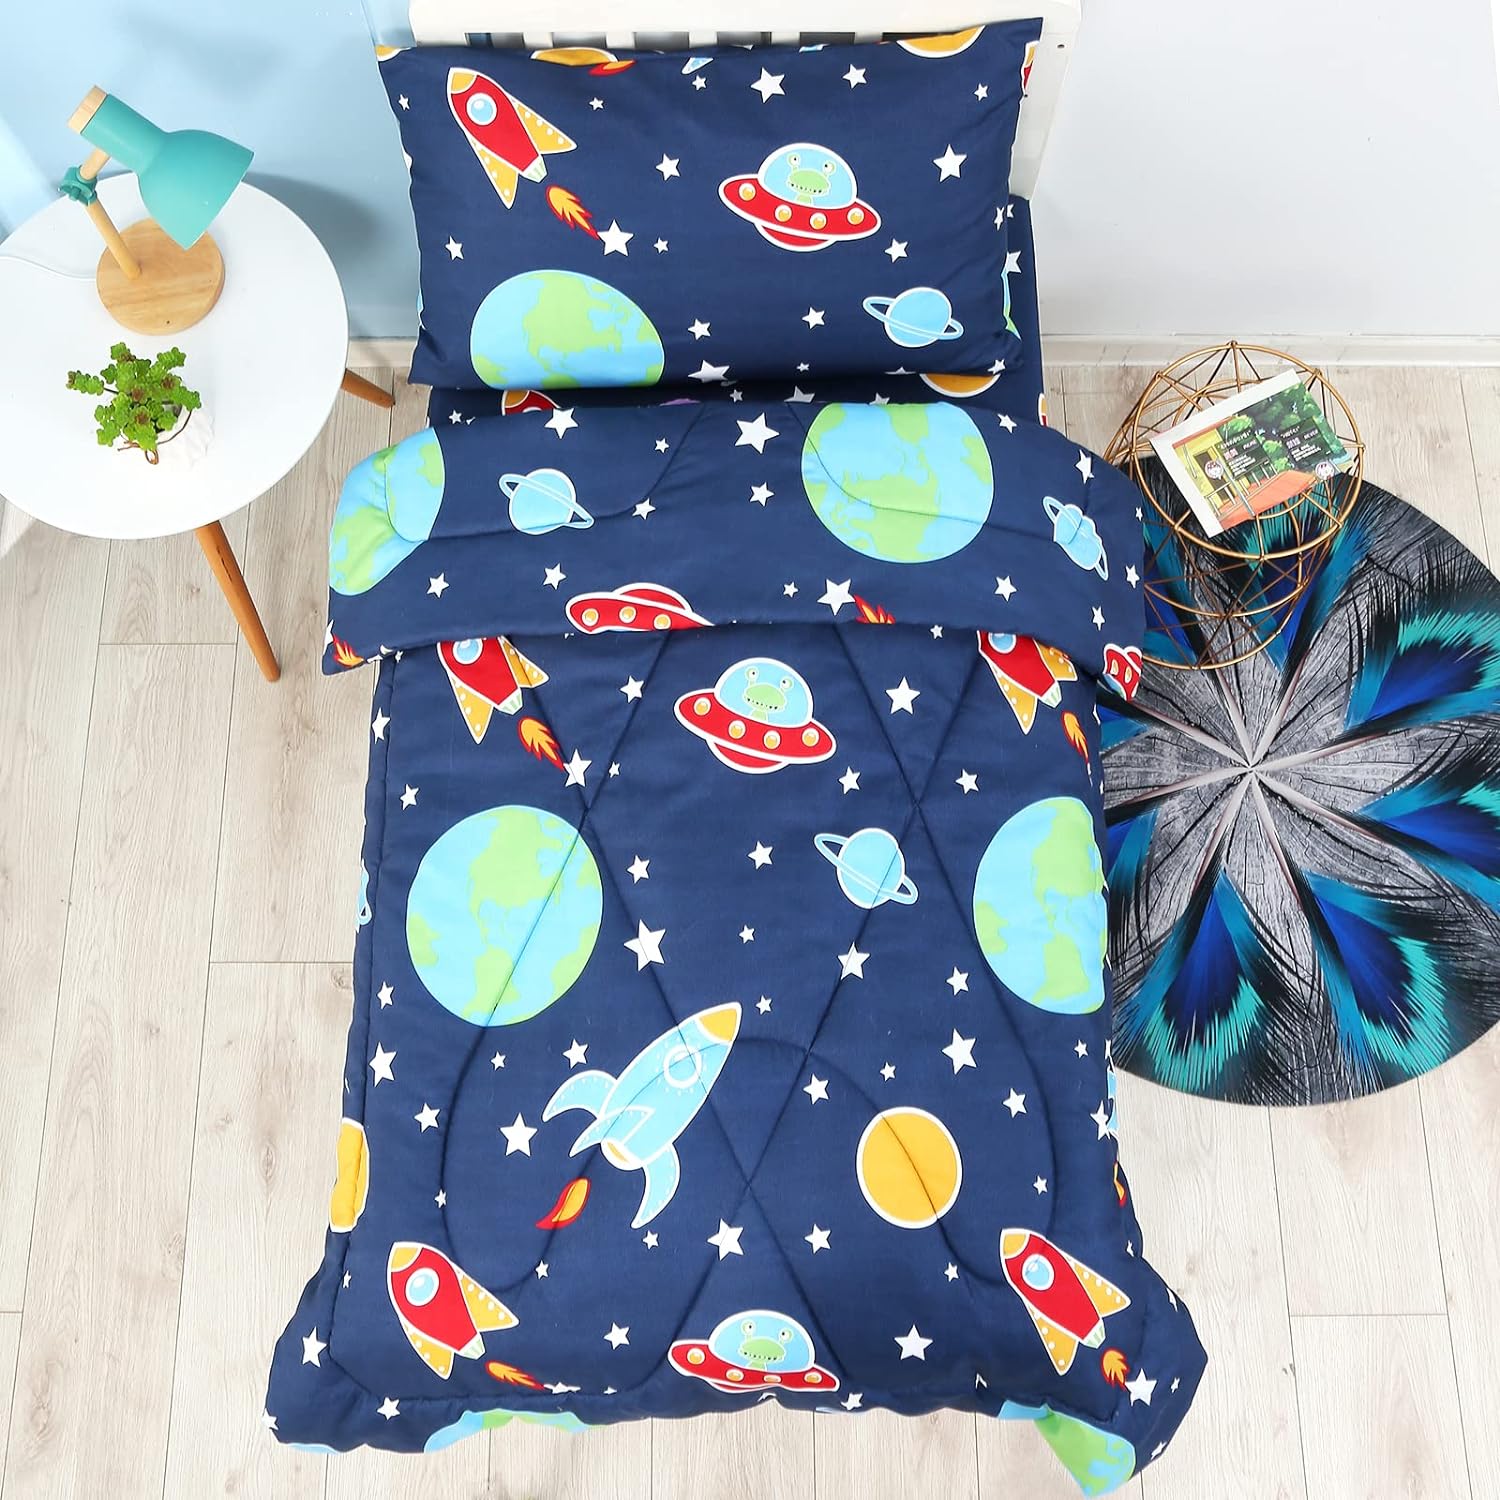 Cloele 3 Piece Toddler Bedding Set - The Perfect Space-Themed Bedding for Your Little Astronaut